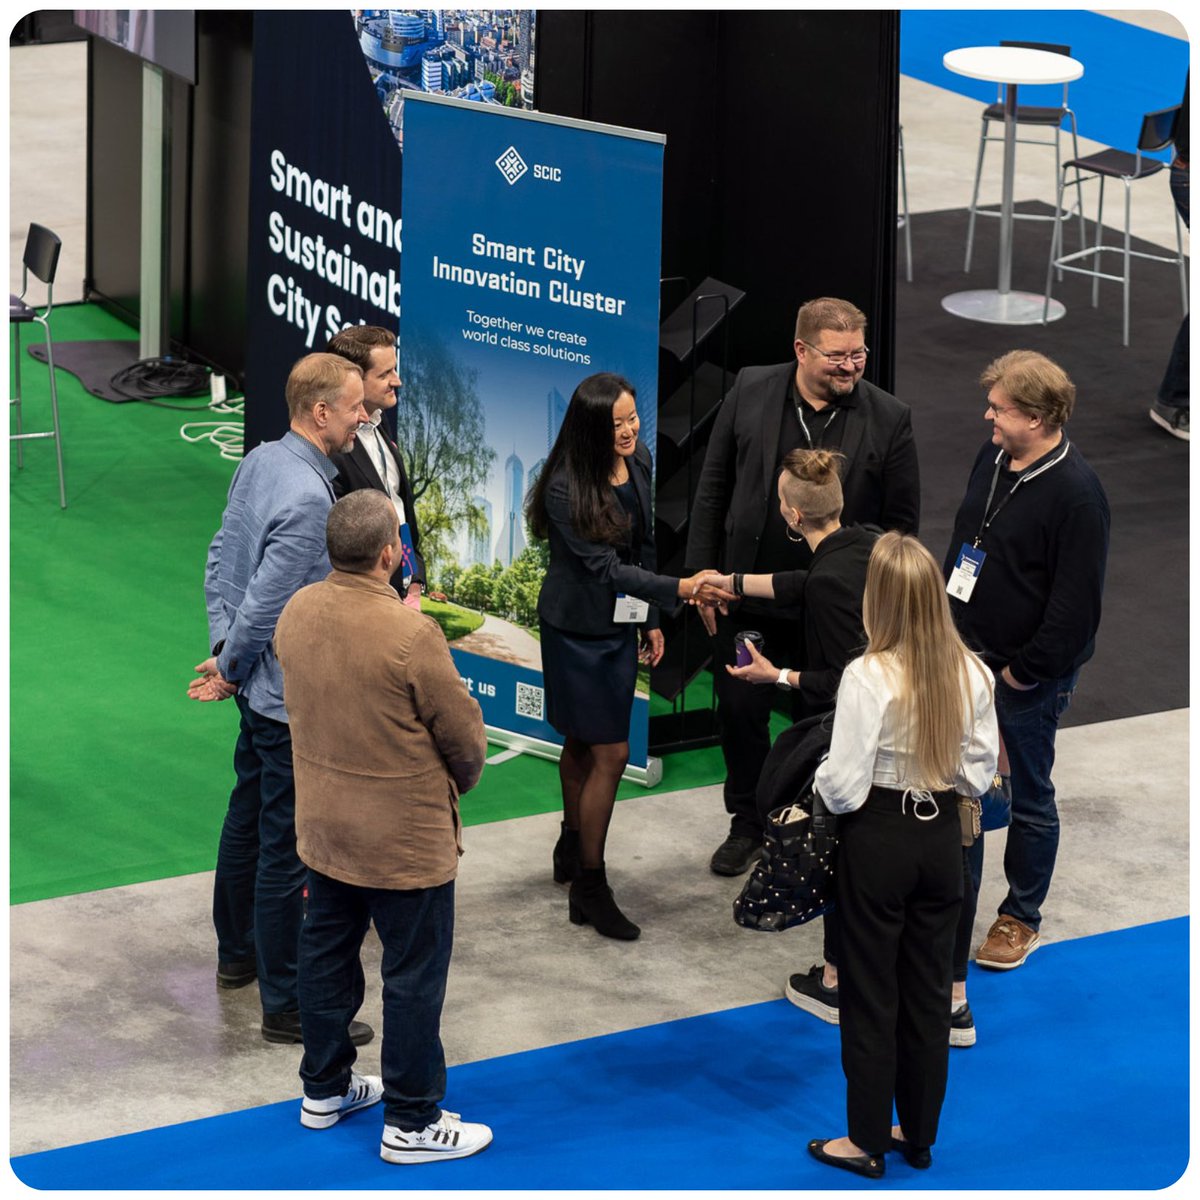 Tampere Smart City Expo & Conference @_tscec was fruitful in means of encounters and new connections. Great conversations during the day at the booth with @ITS_Finland and @BusinessTampere. New innovative members were acquired as well.

#smartcities #tscec #beyondtheabstract